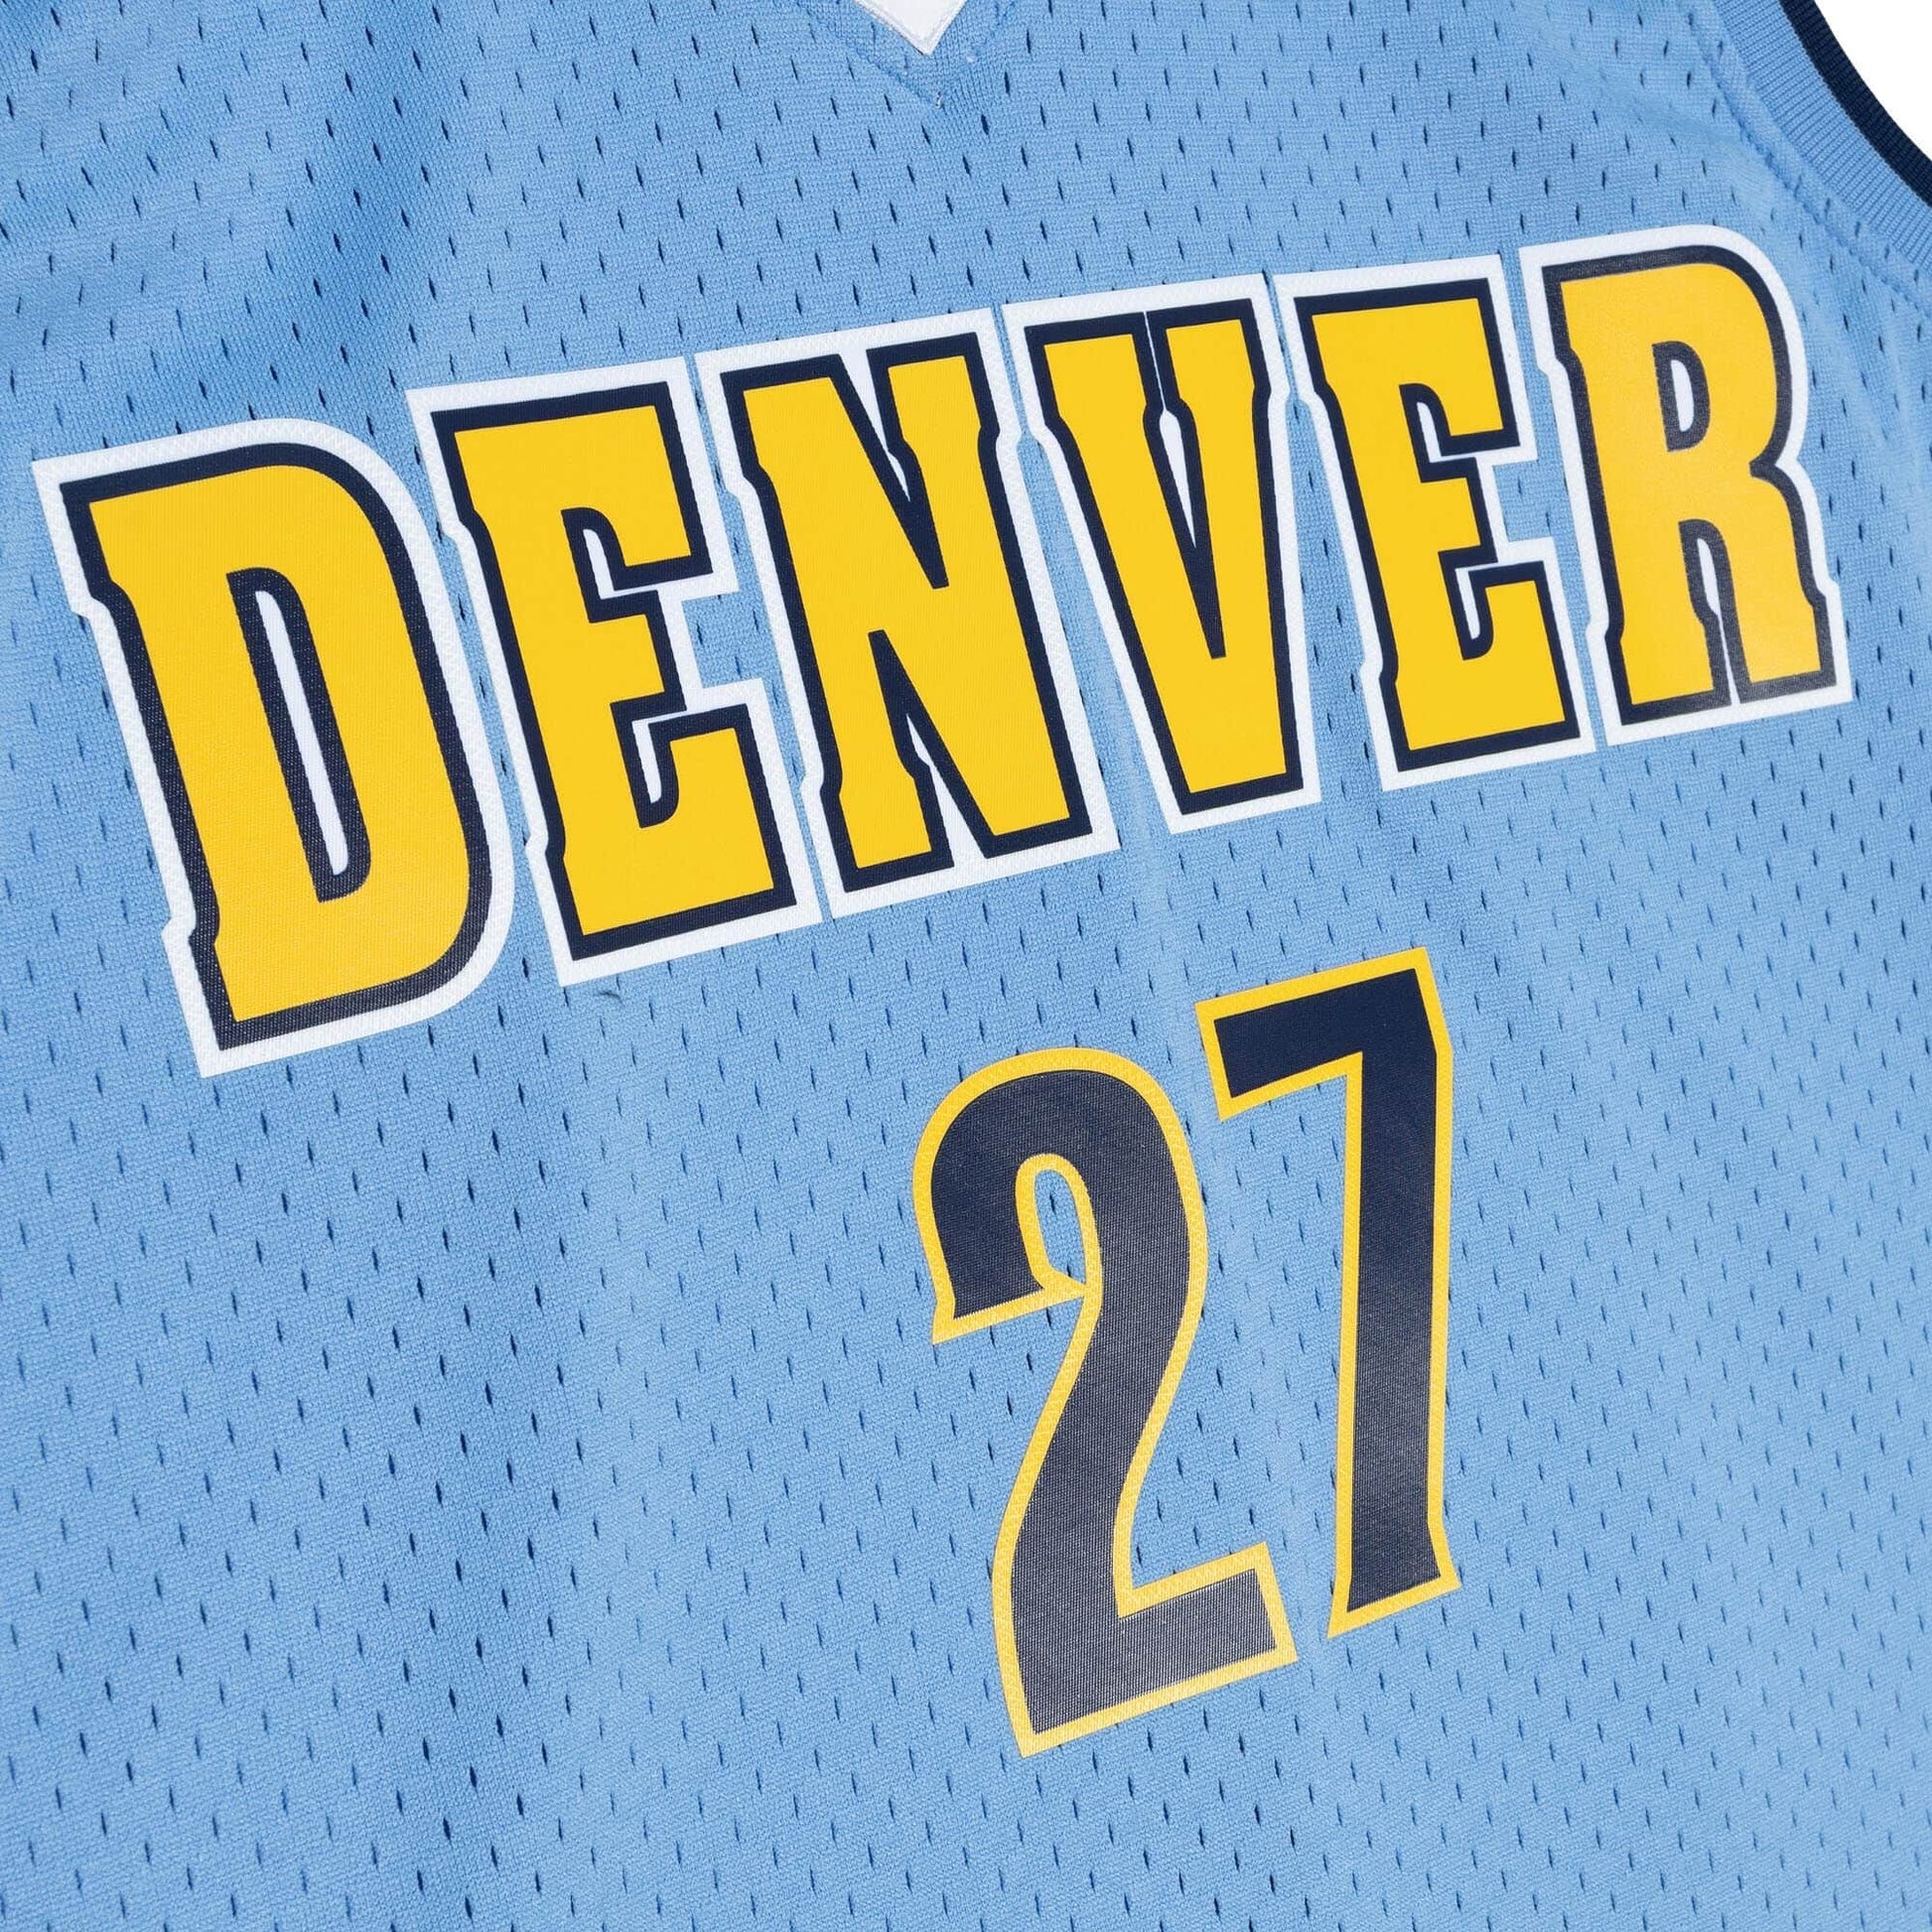  Jamal Murray Denver Nuggets Navy #27 Youth 8-20 Alternate  Edition Swingman Player Jersey : Sports & Outdoors